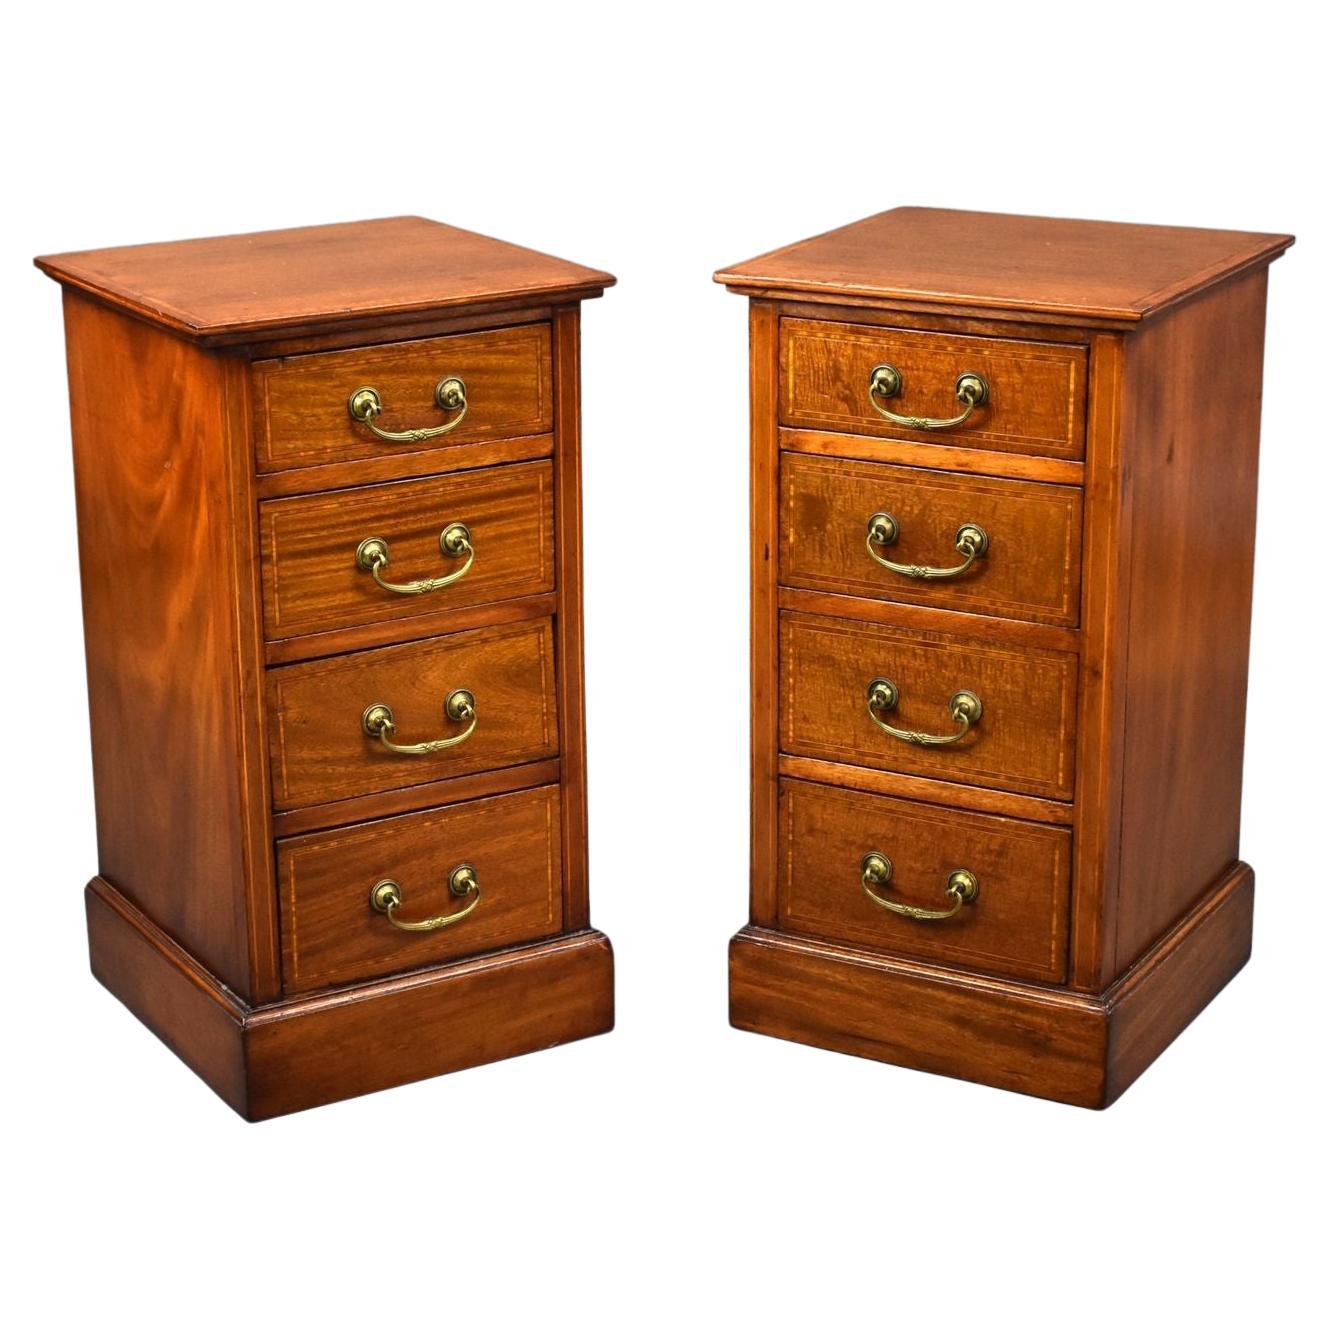 Pair of Edwardian Bedside Chests